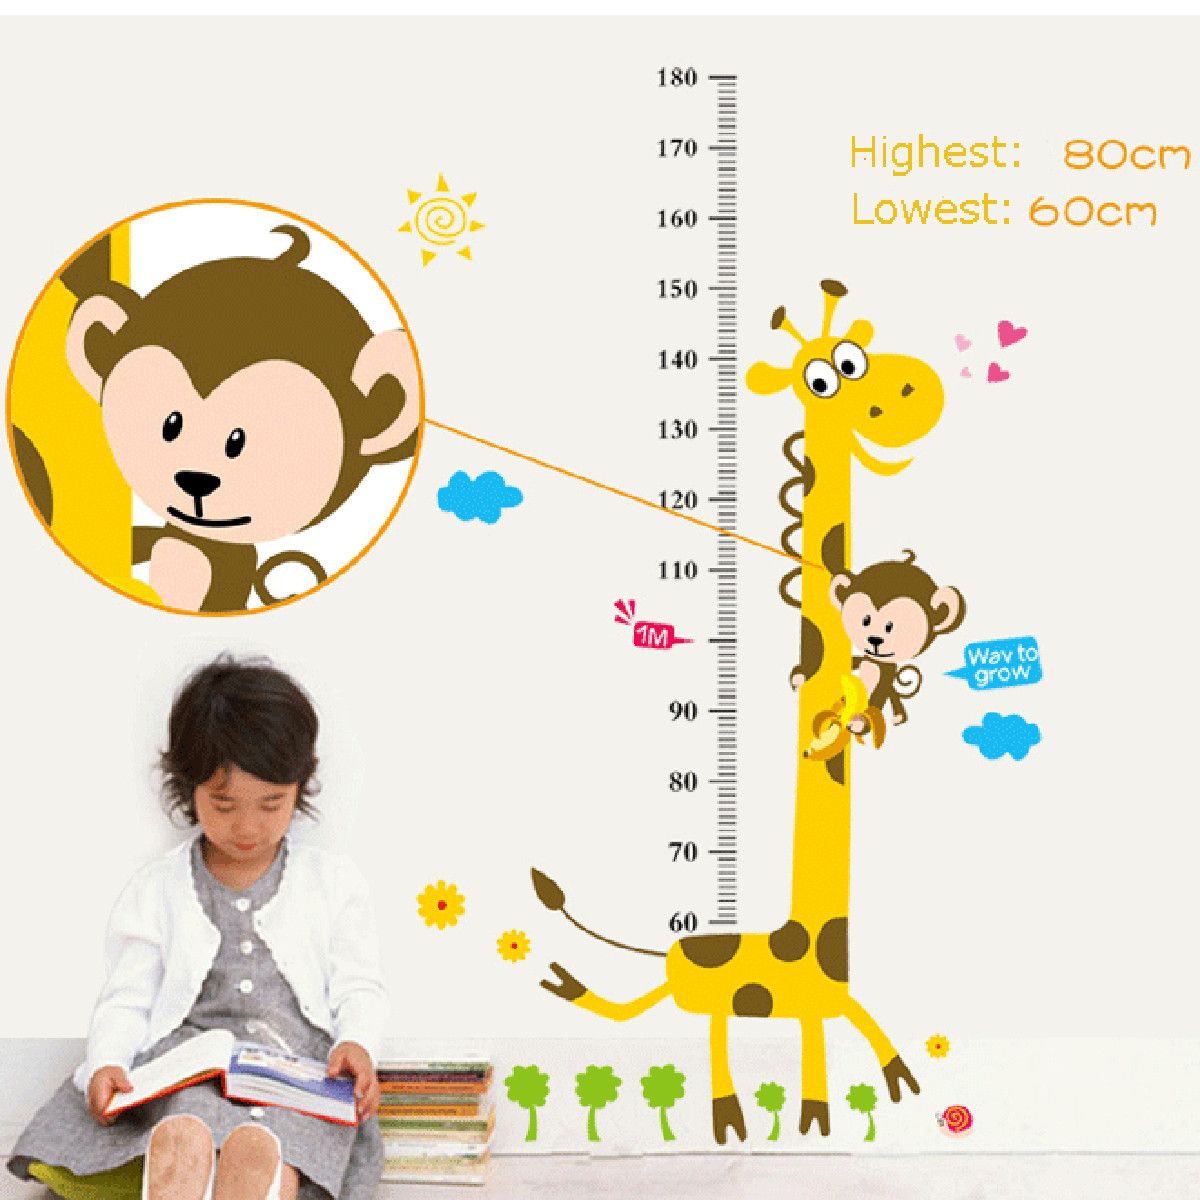 Removable-Height-Chart-Measure-Wall-Sticker-Giraffe-Decal-for-Kids-Baby-Room-1557067